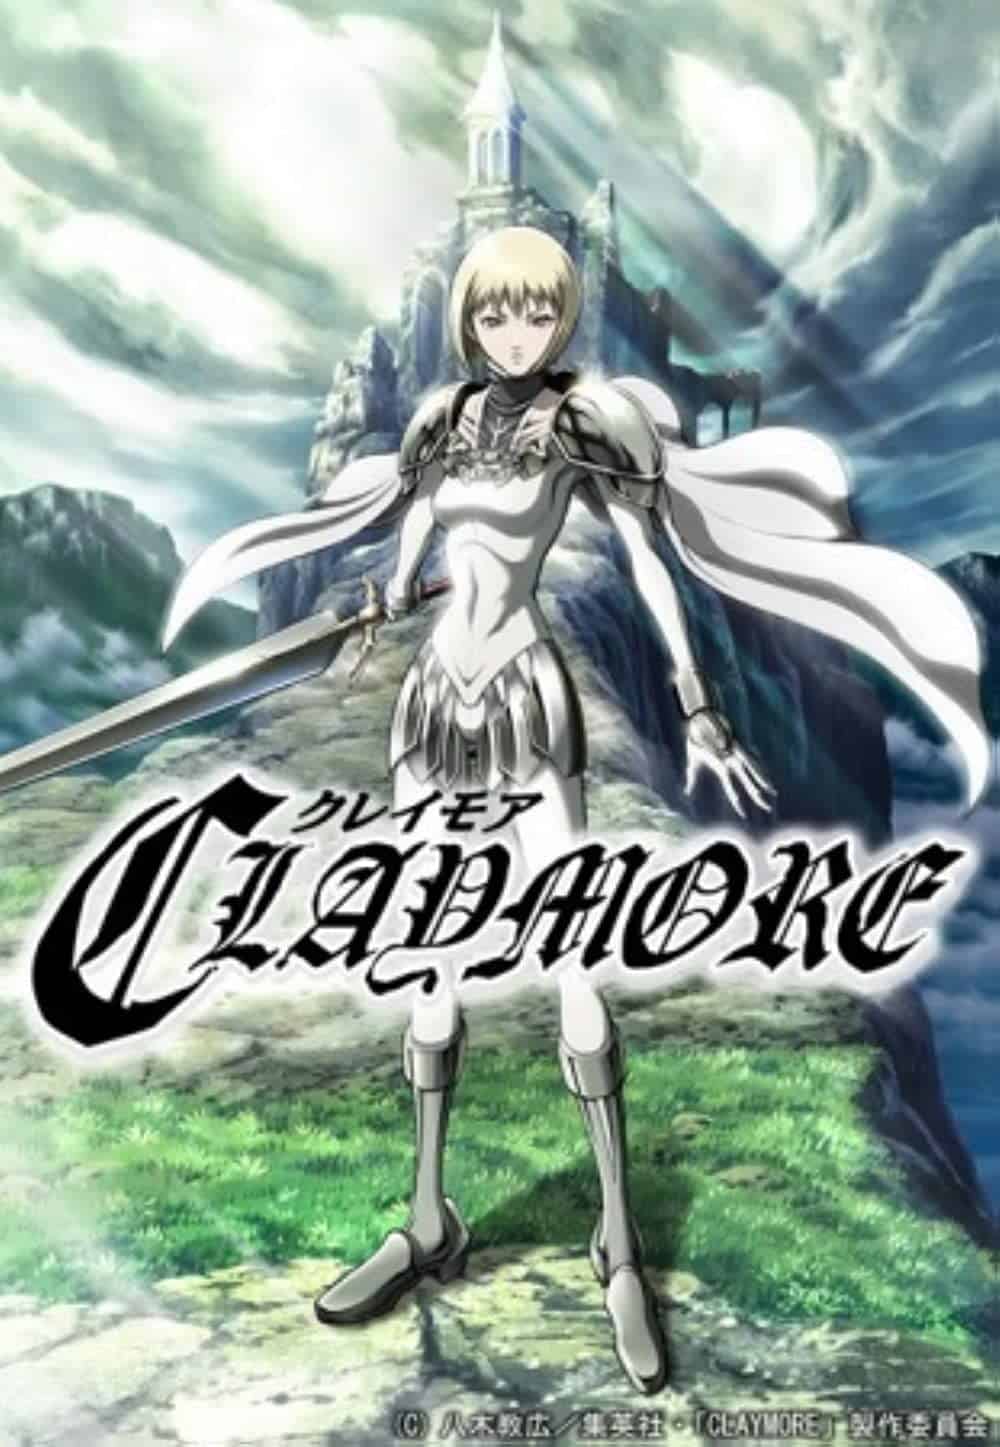 Claymore hd poster